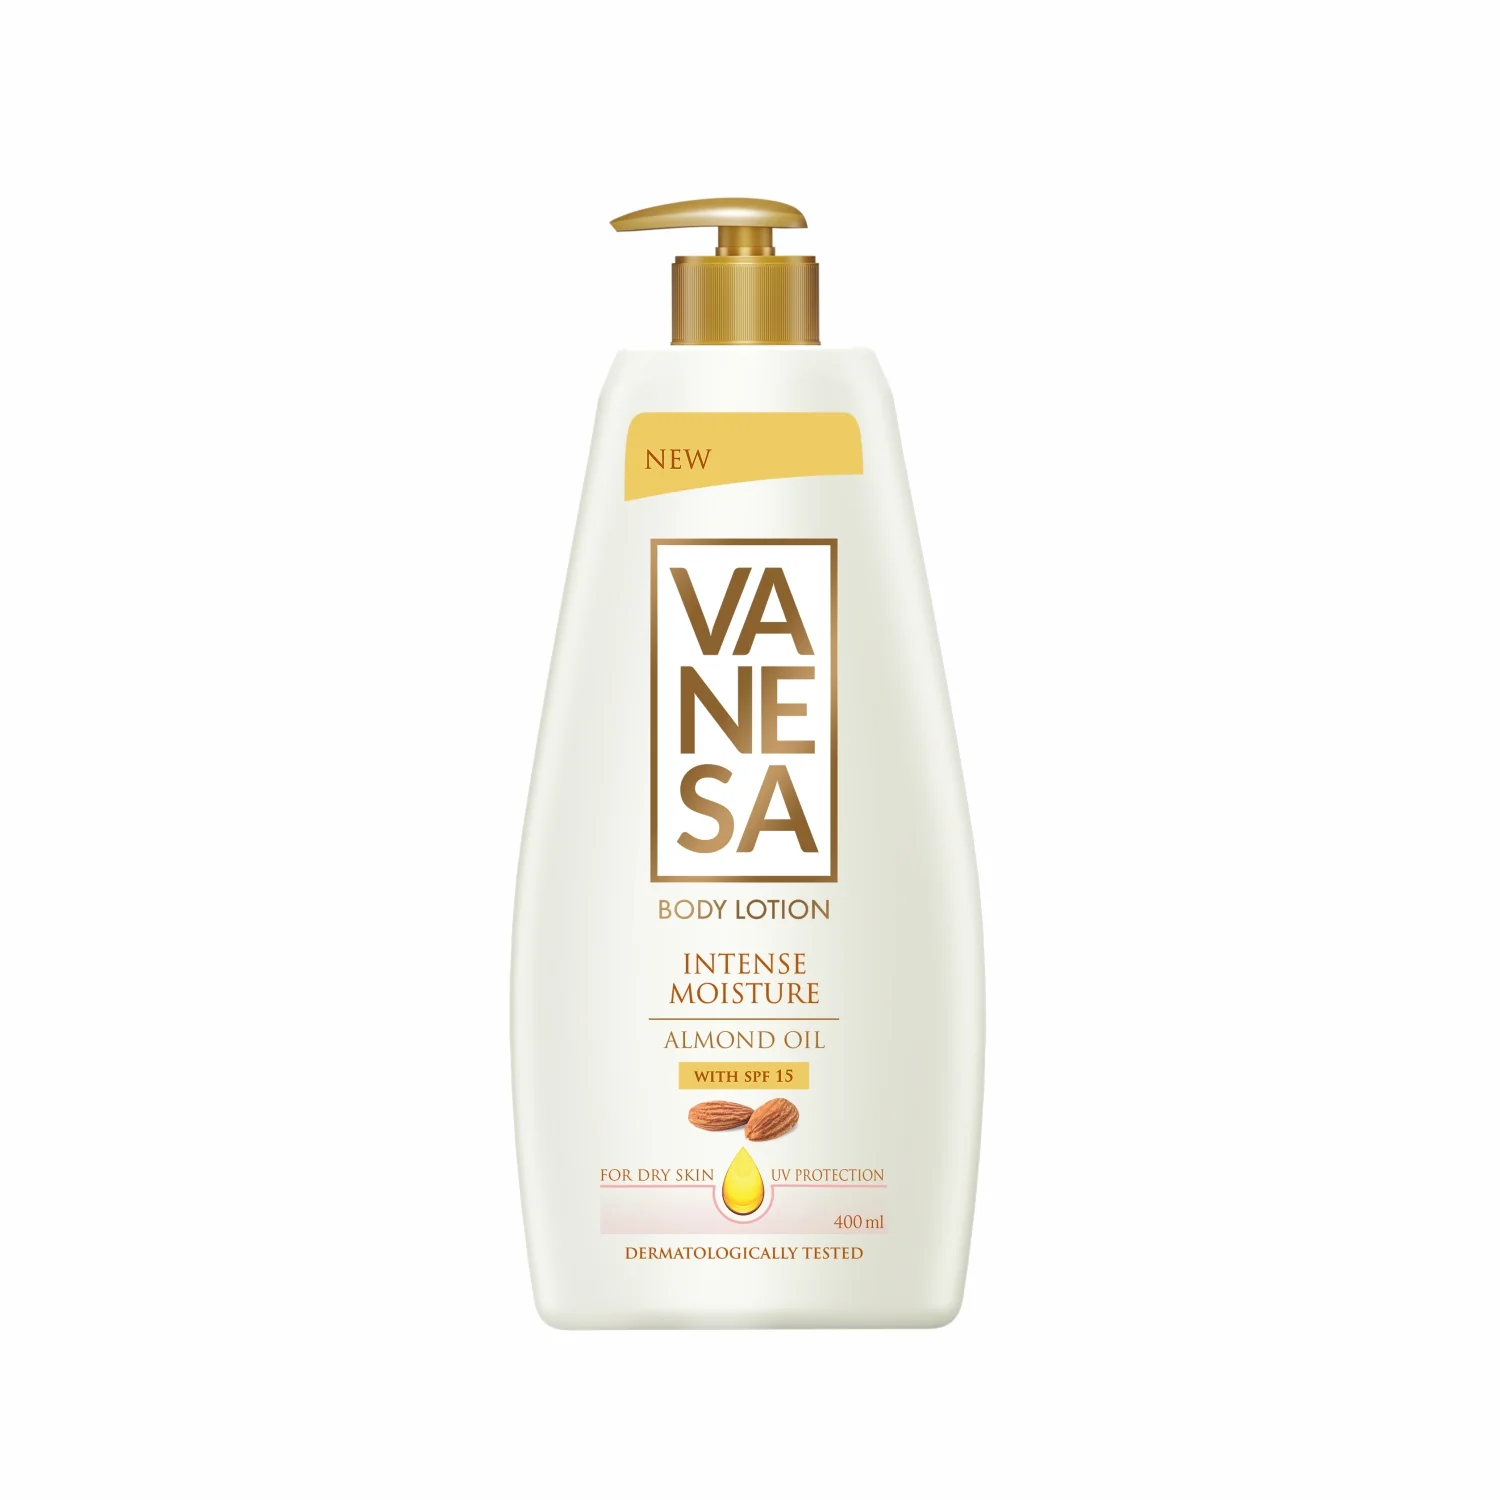 Vanesa Intense Moisture Body Lotion | Almond Oil with SPF | Sun Protection | For Dry Skin| Dermatologically